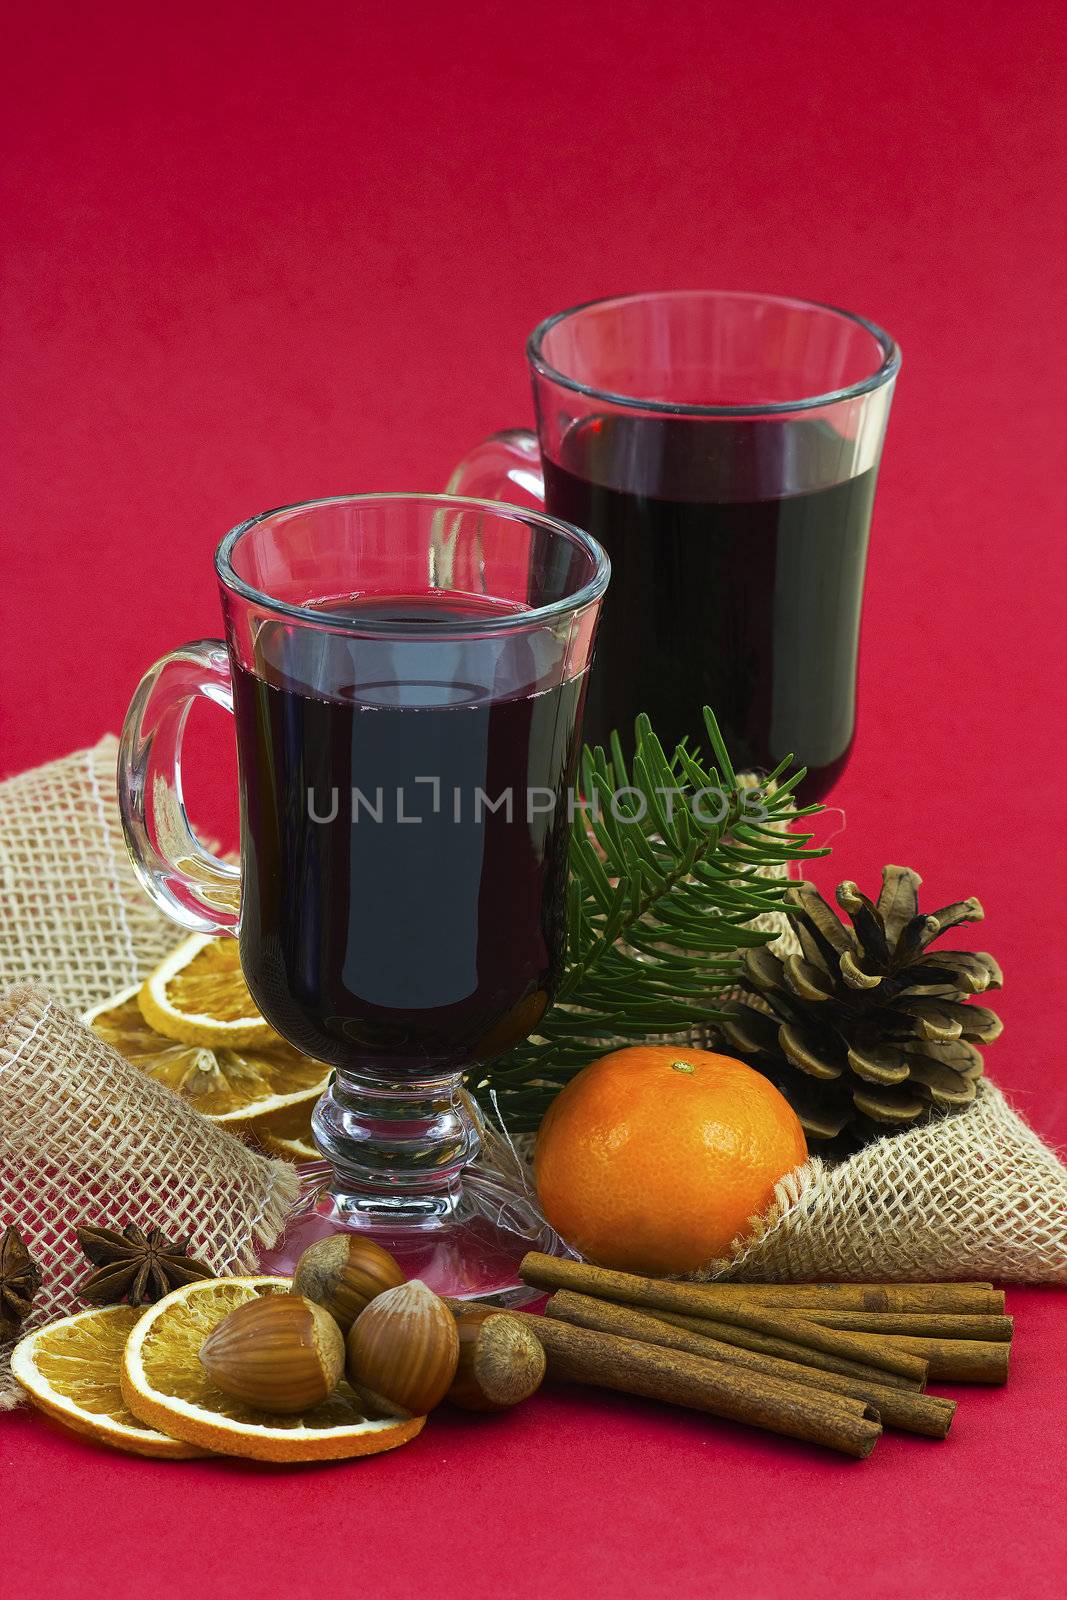 hot wine and christmas decoration